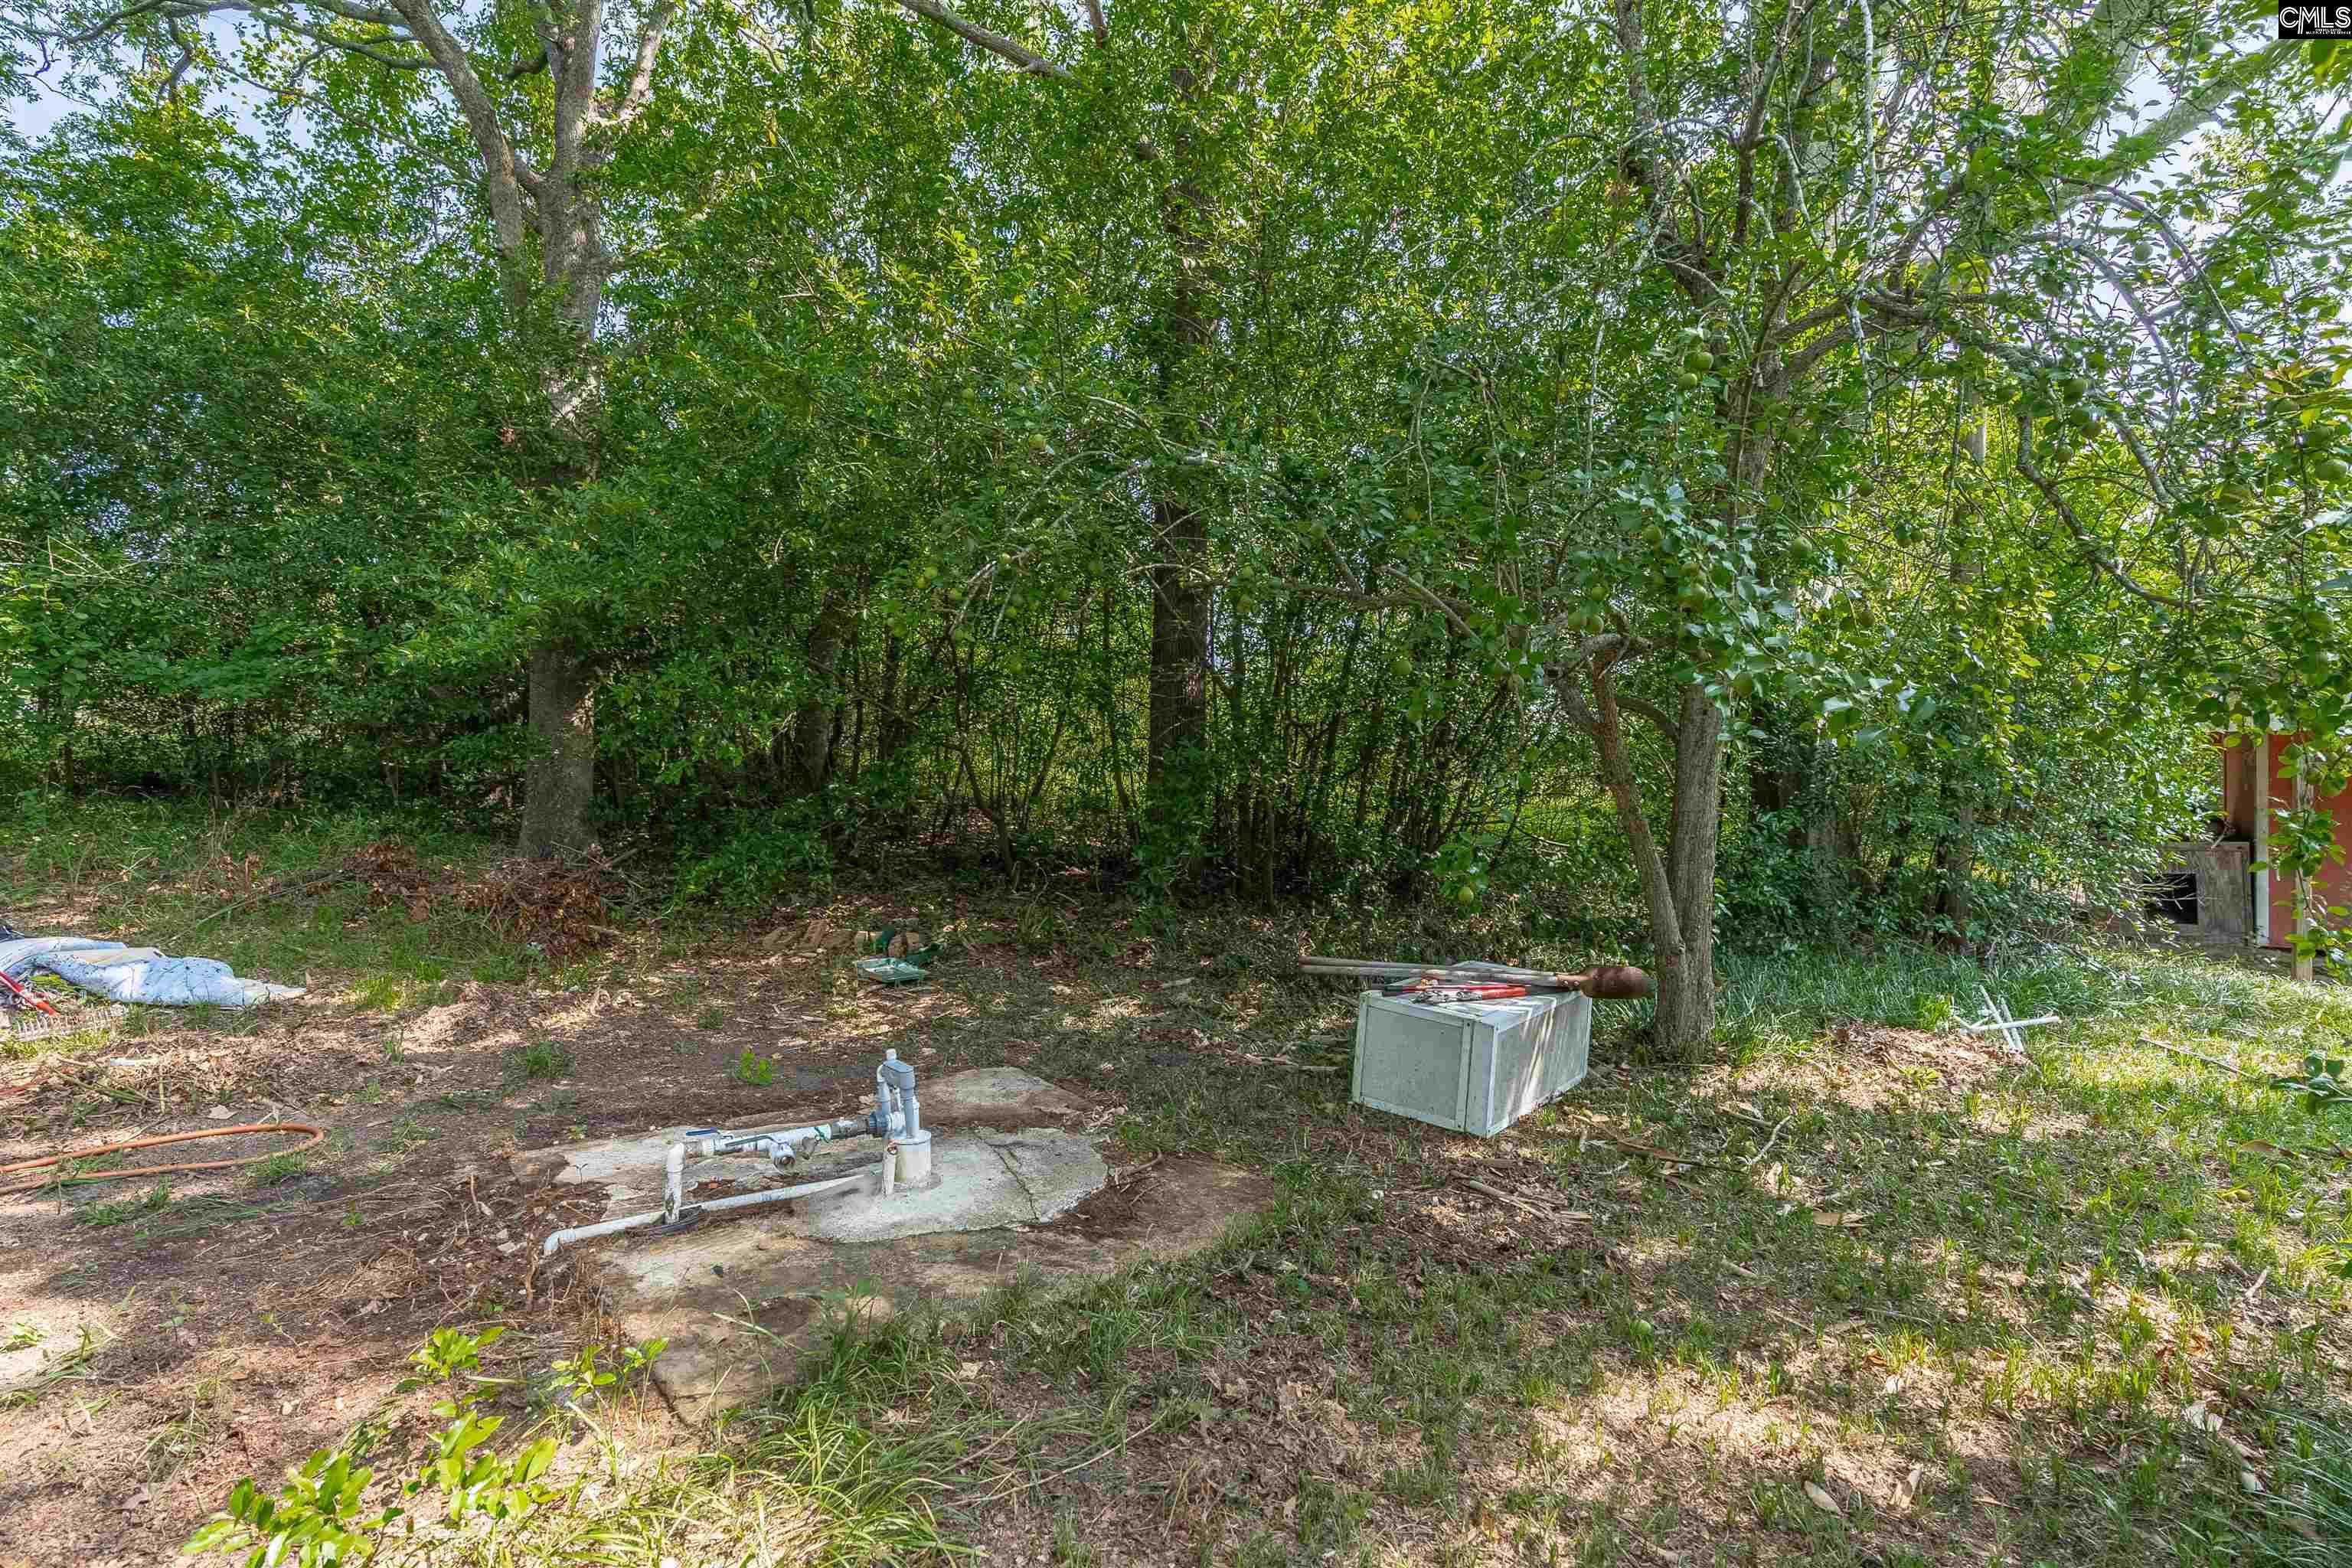 This is the well that serves 113 Norman Drive and all four mobile homes